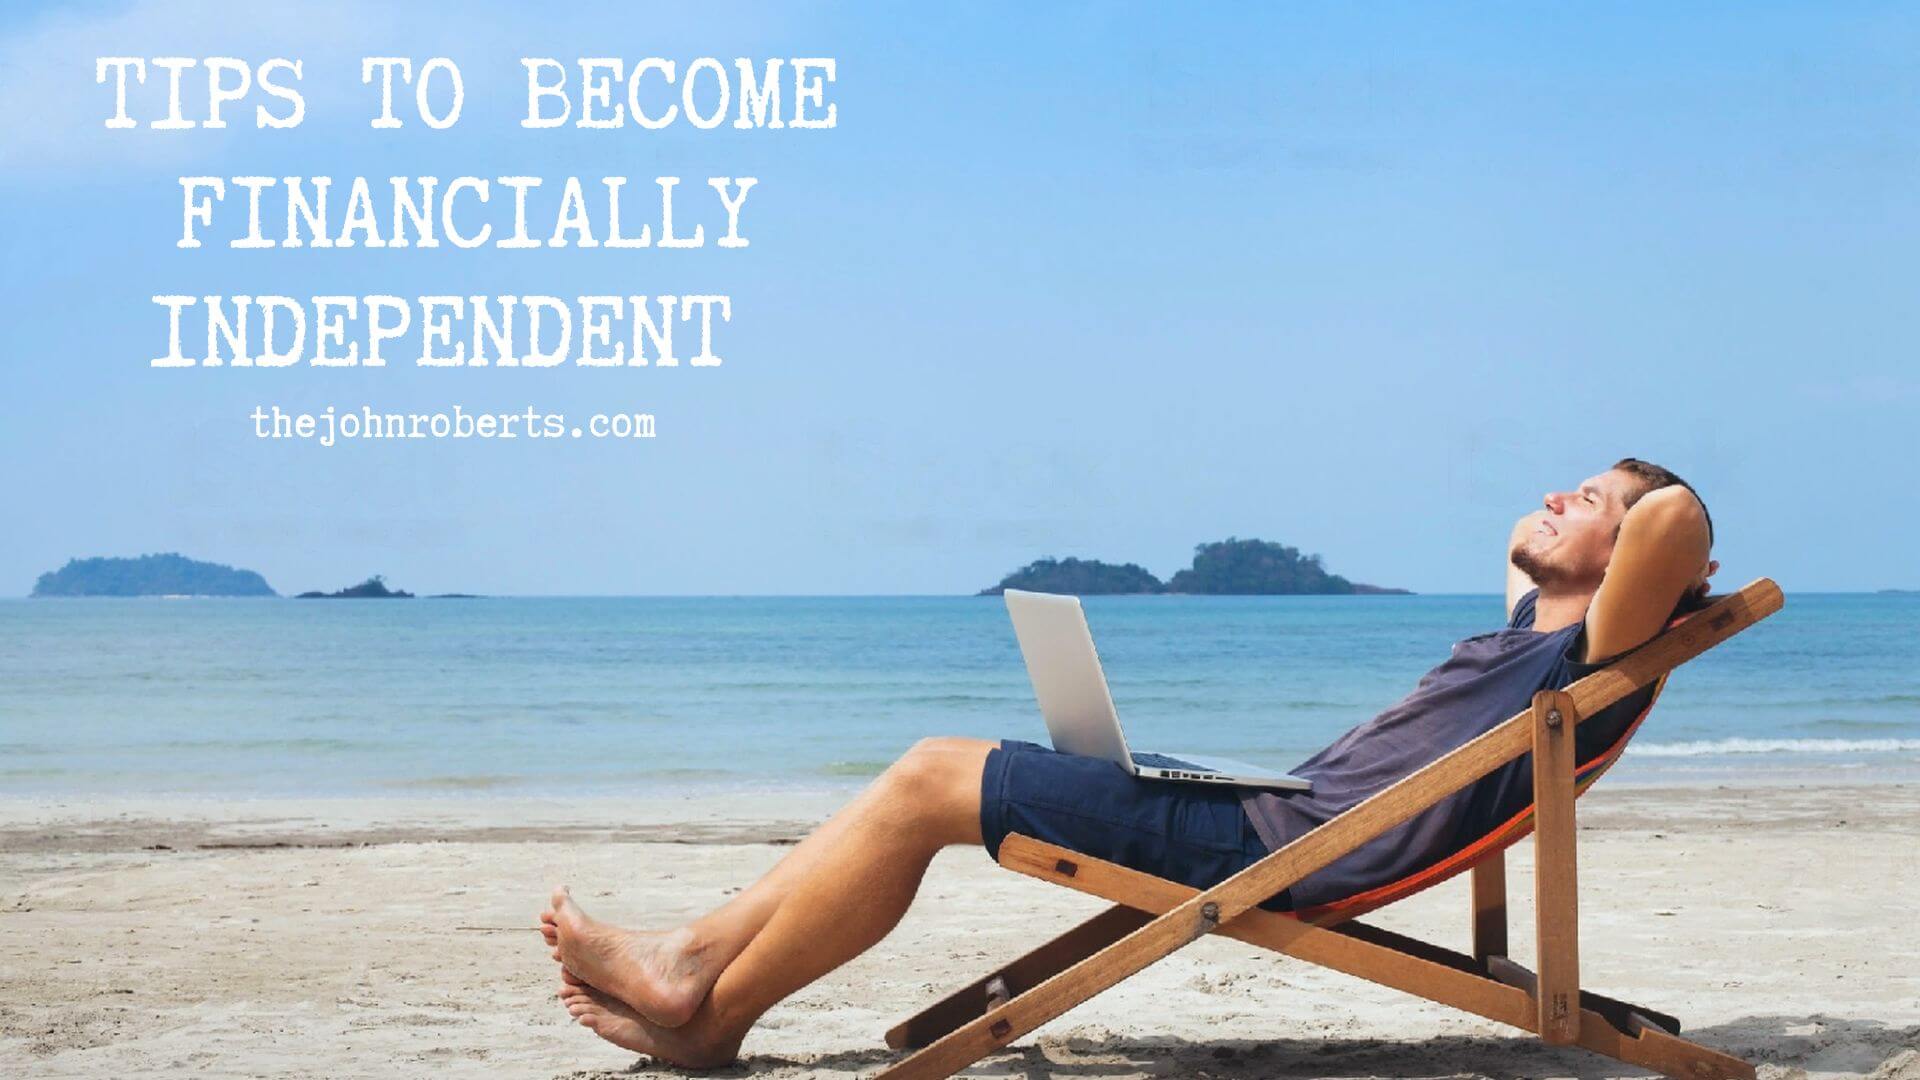 Tips to Become Financially Independent